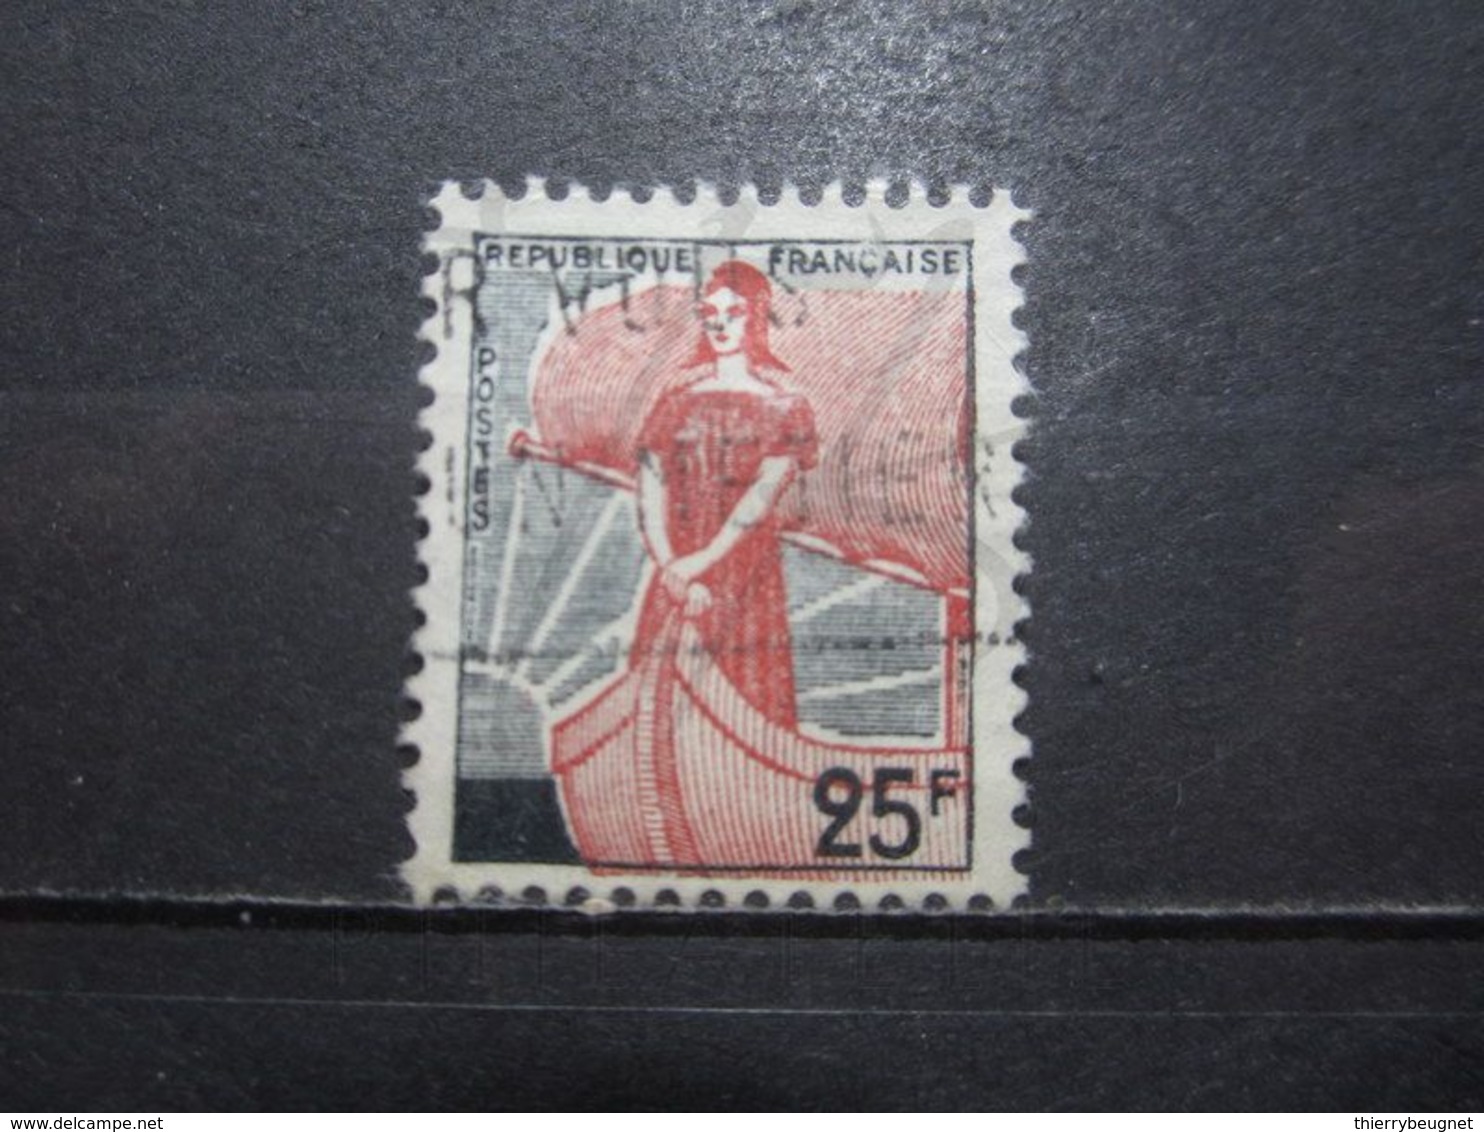 VEND BEAU TIMBRE DE FRANCE N° 1216 , ROUGE DECALE VERS LE BAS !!! - Used Stamps